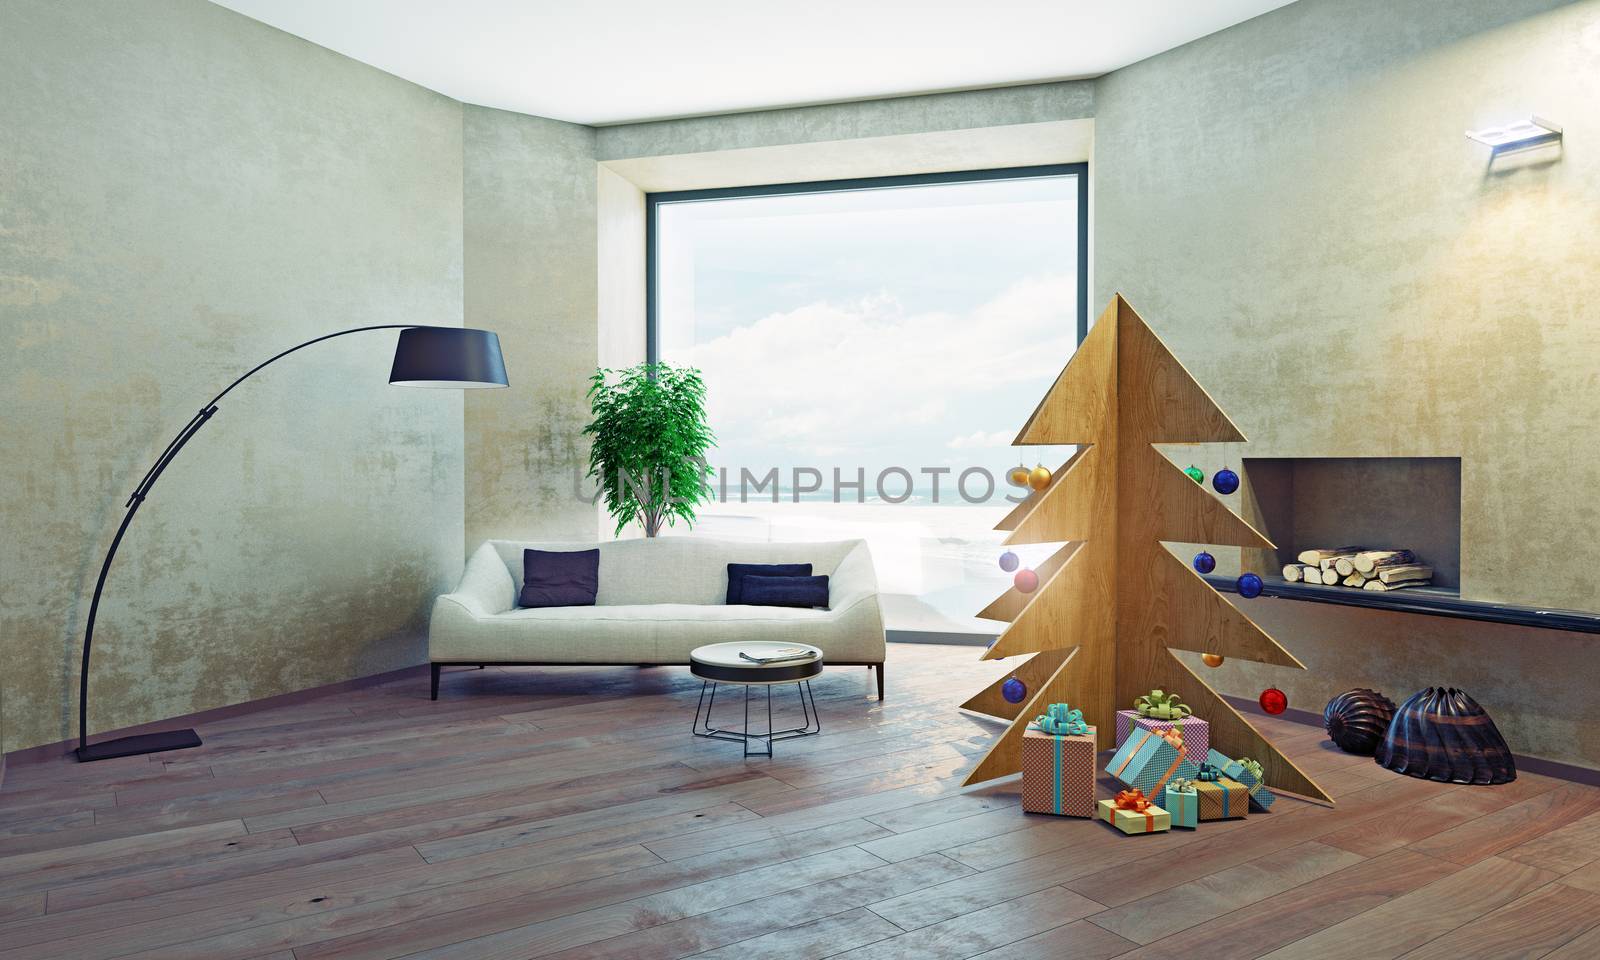  interior with plywood Christmas tree by vicnt